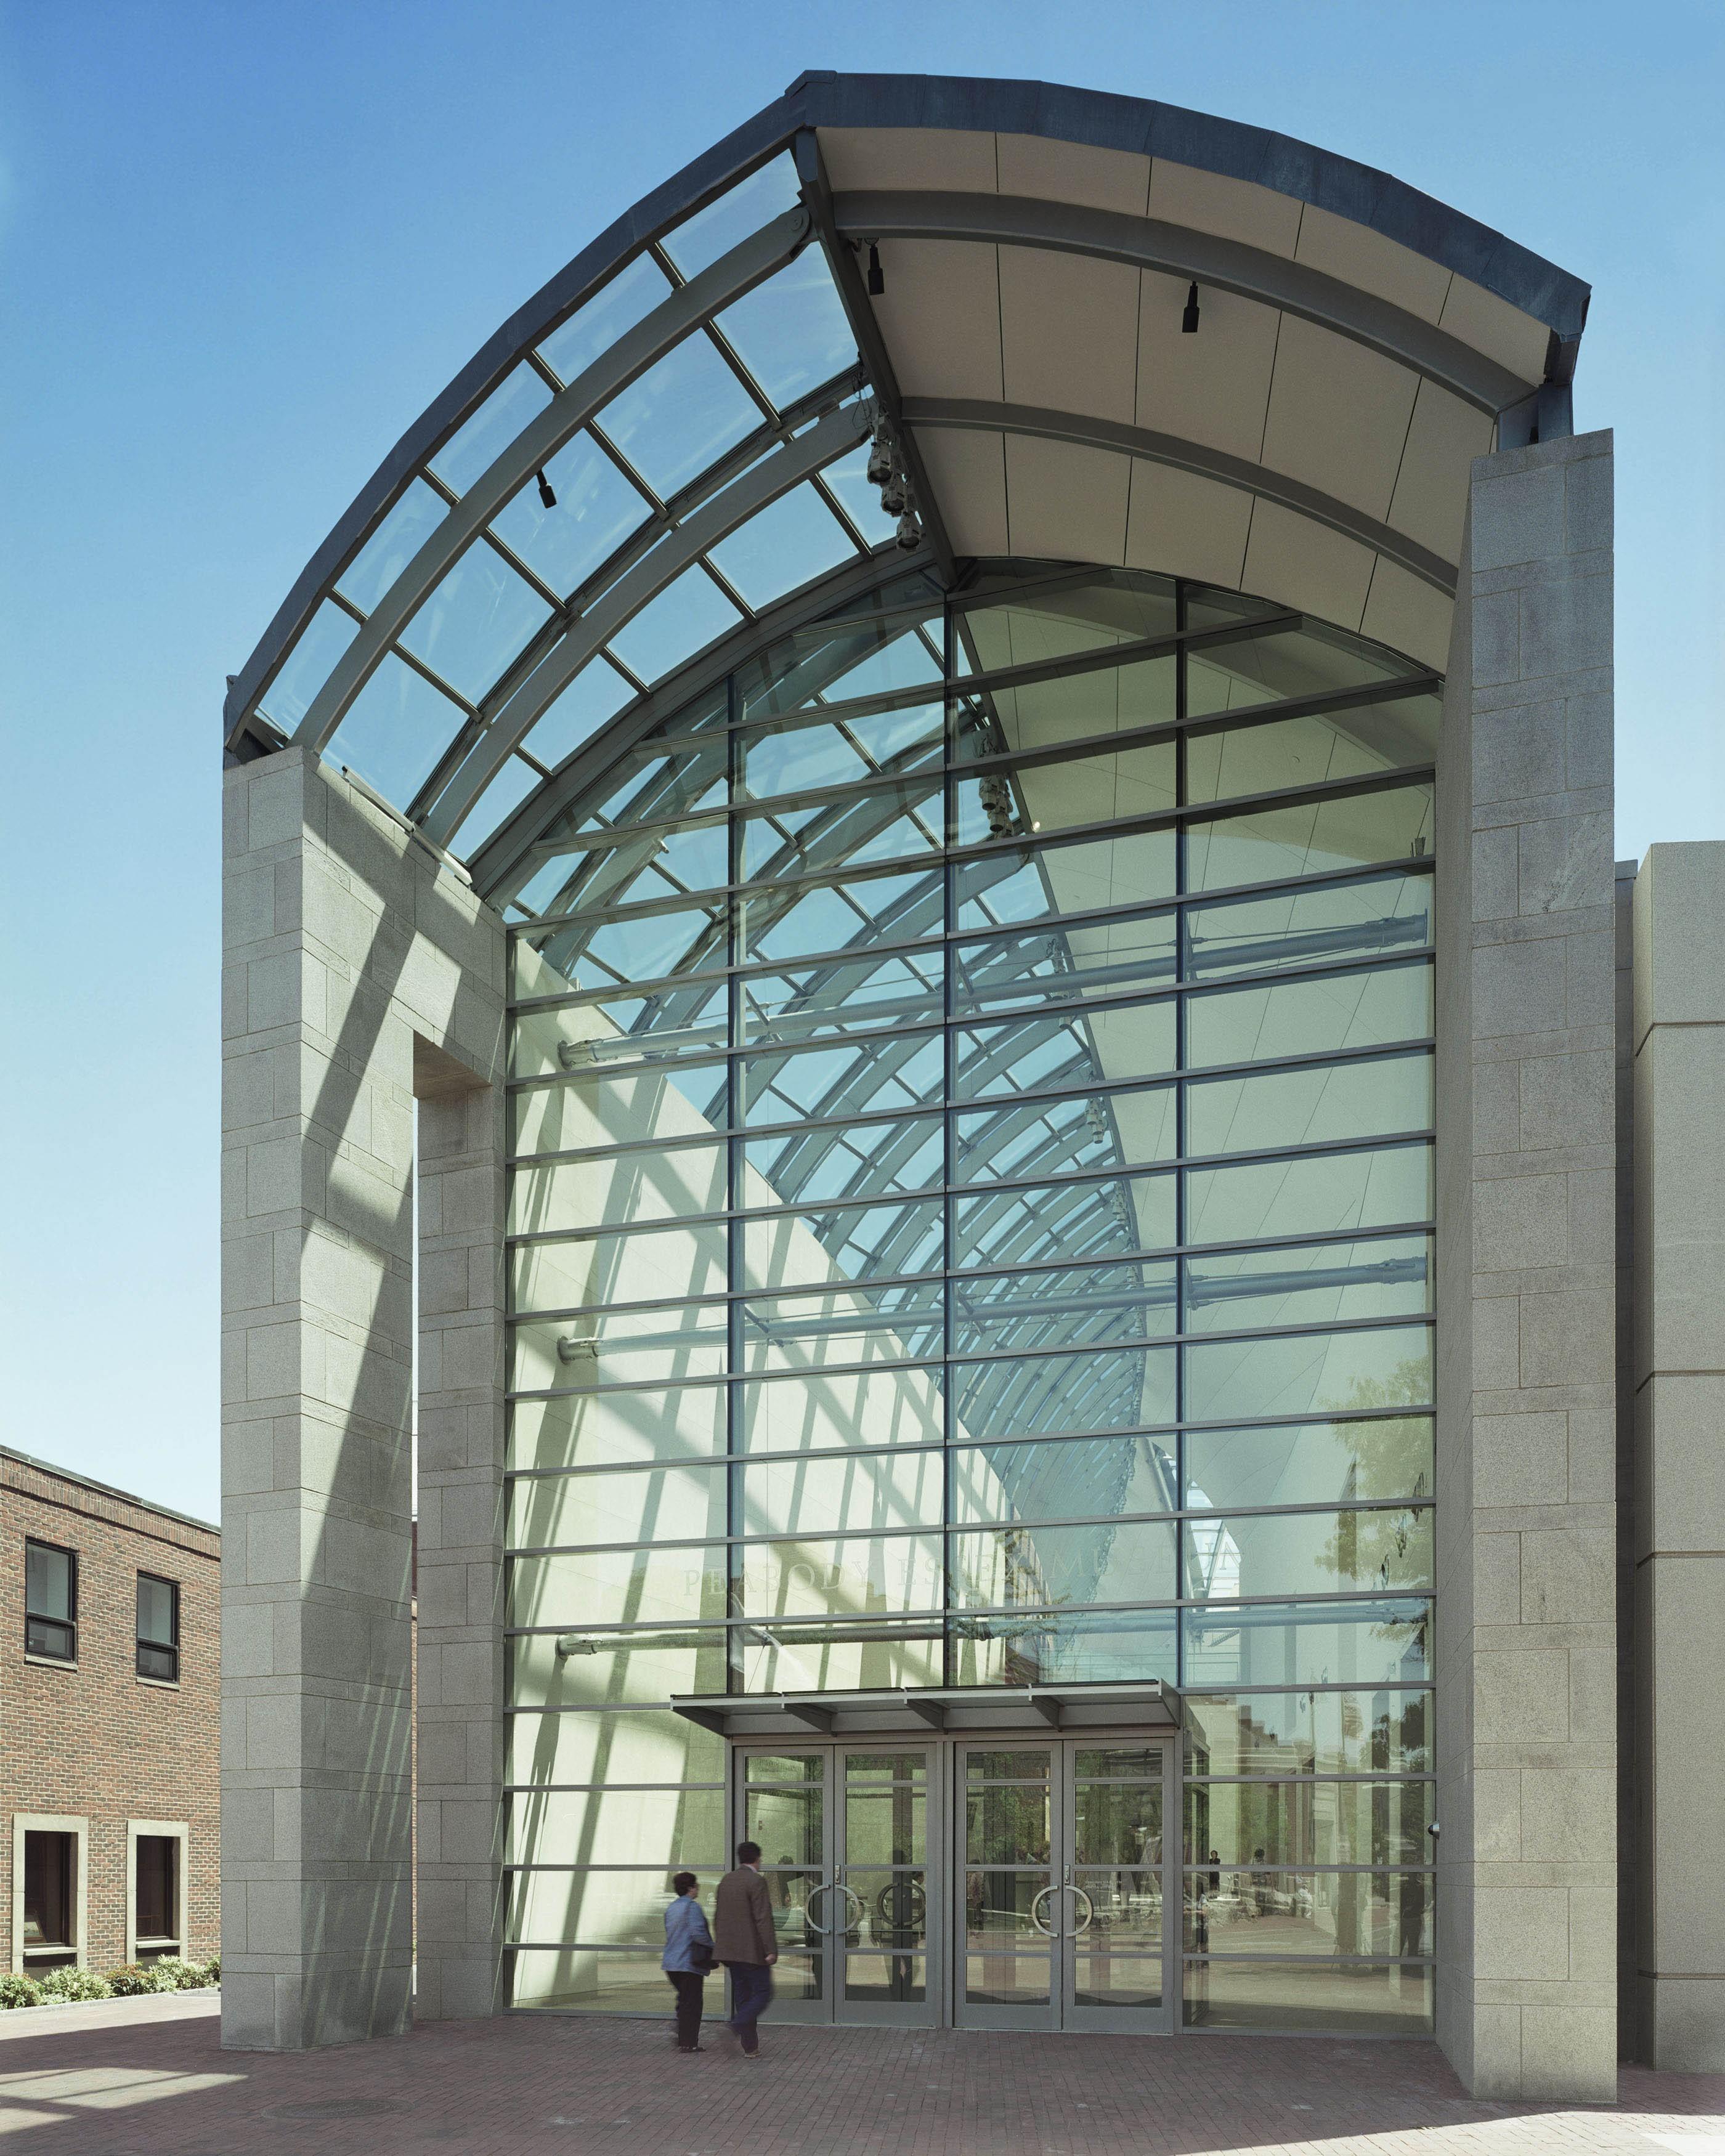 Cover image of this place Peabody Essex Museum (PEM)